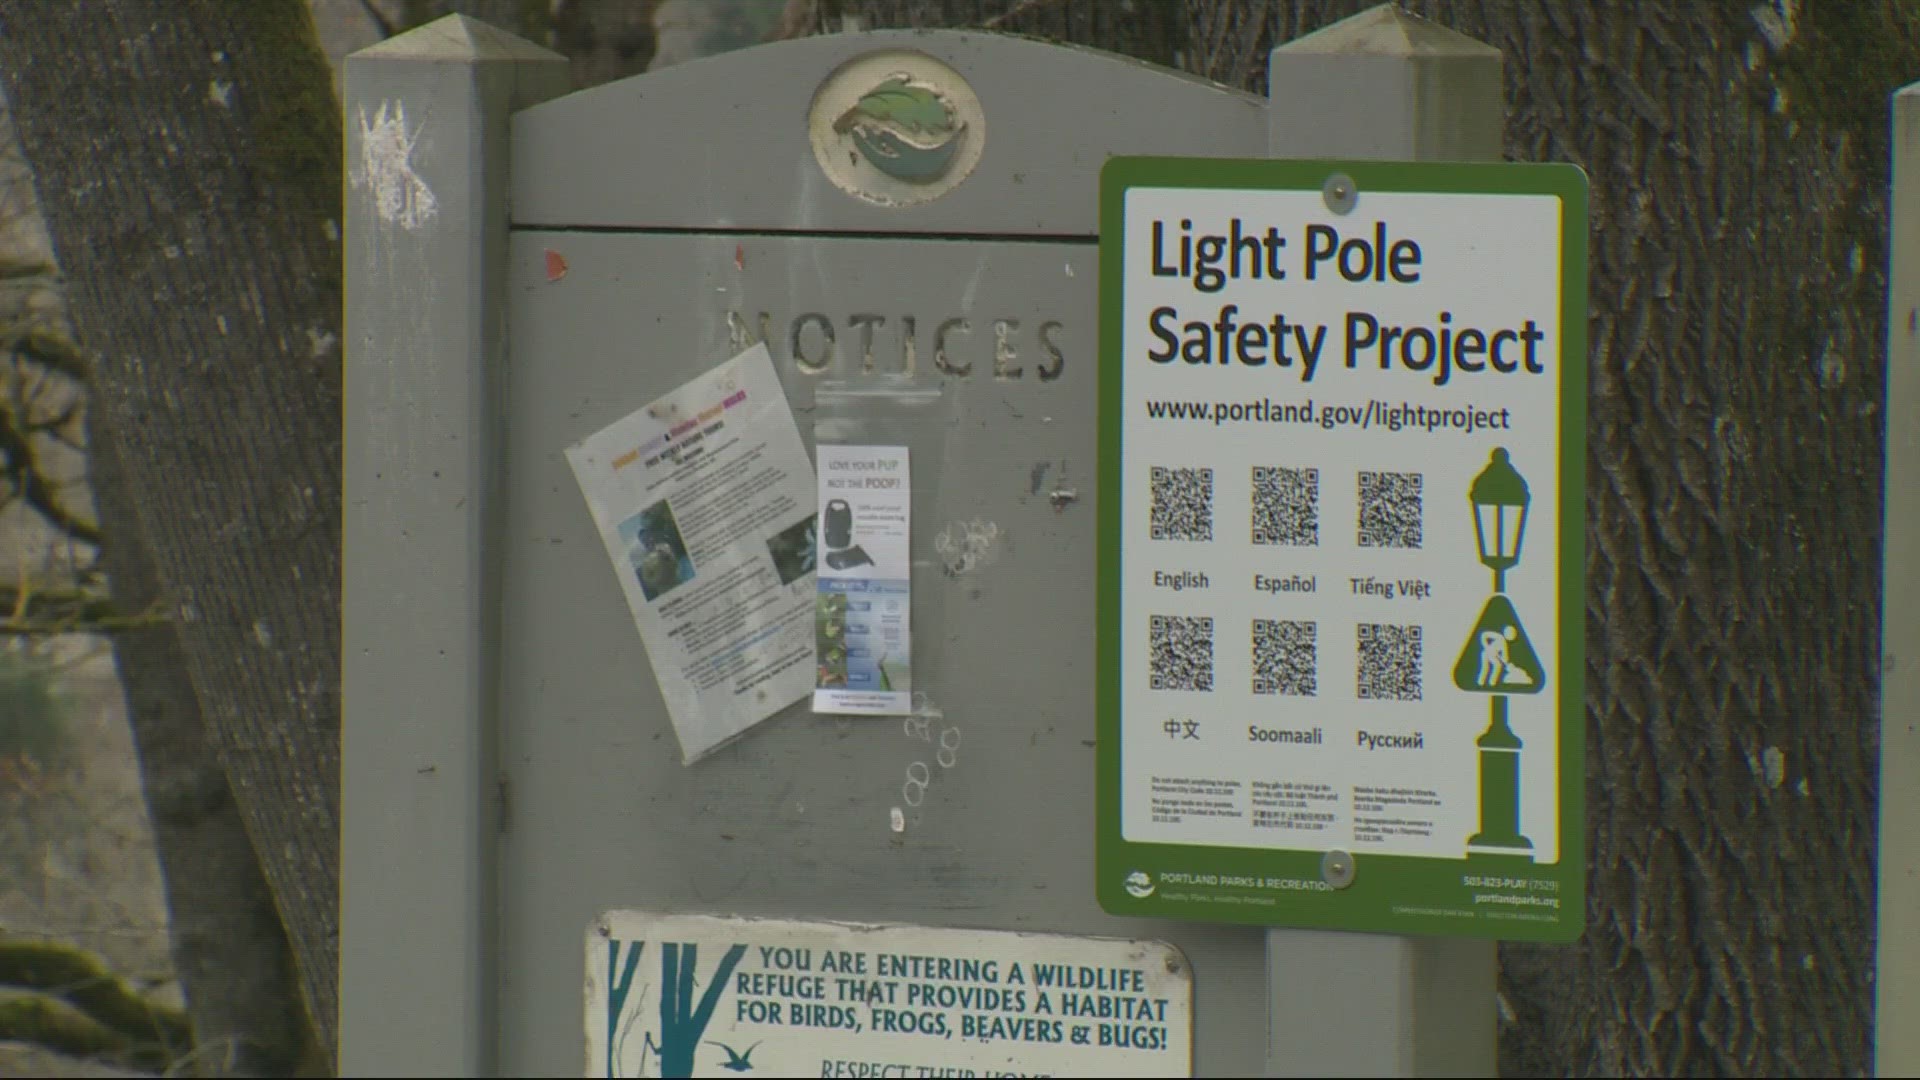 The city plans to replace the light poles across 12 parks but has not yet secured the funding to do so.